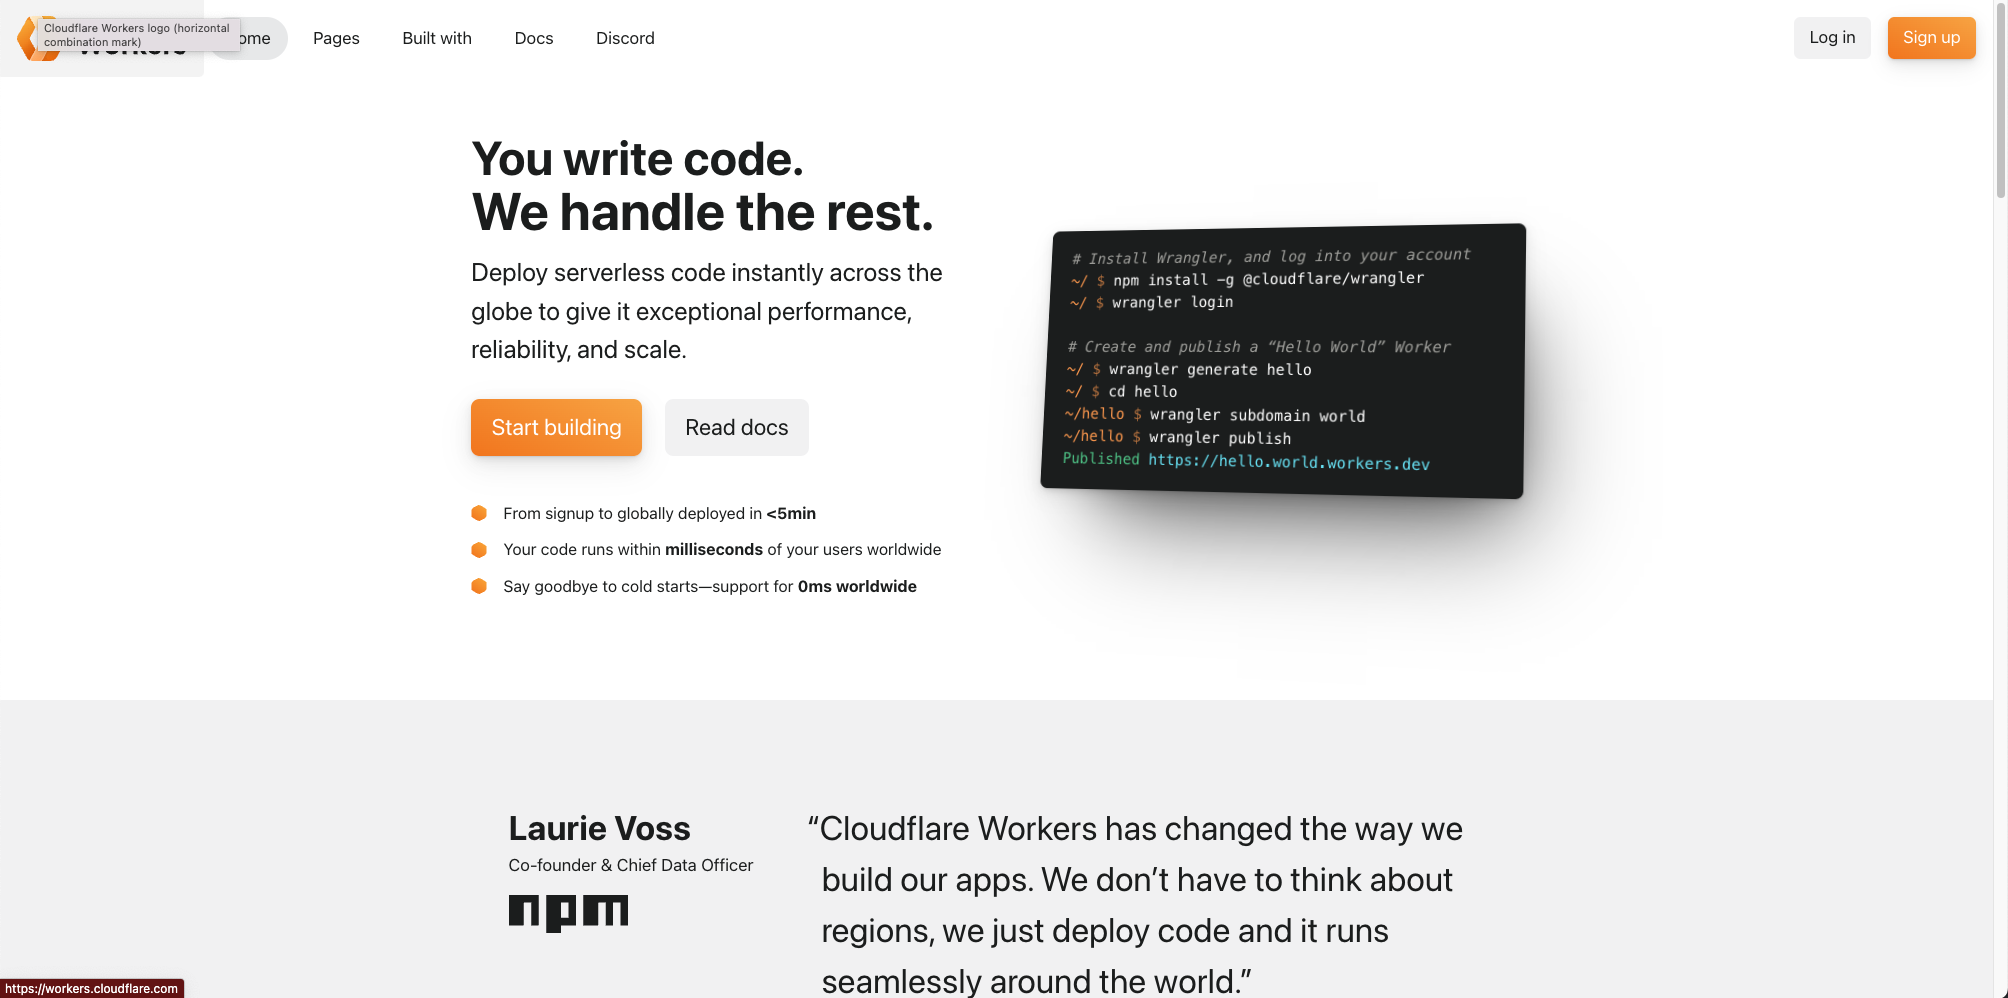 Screenshot of the CloudFlare Workers website